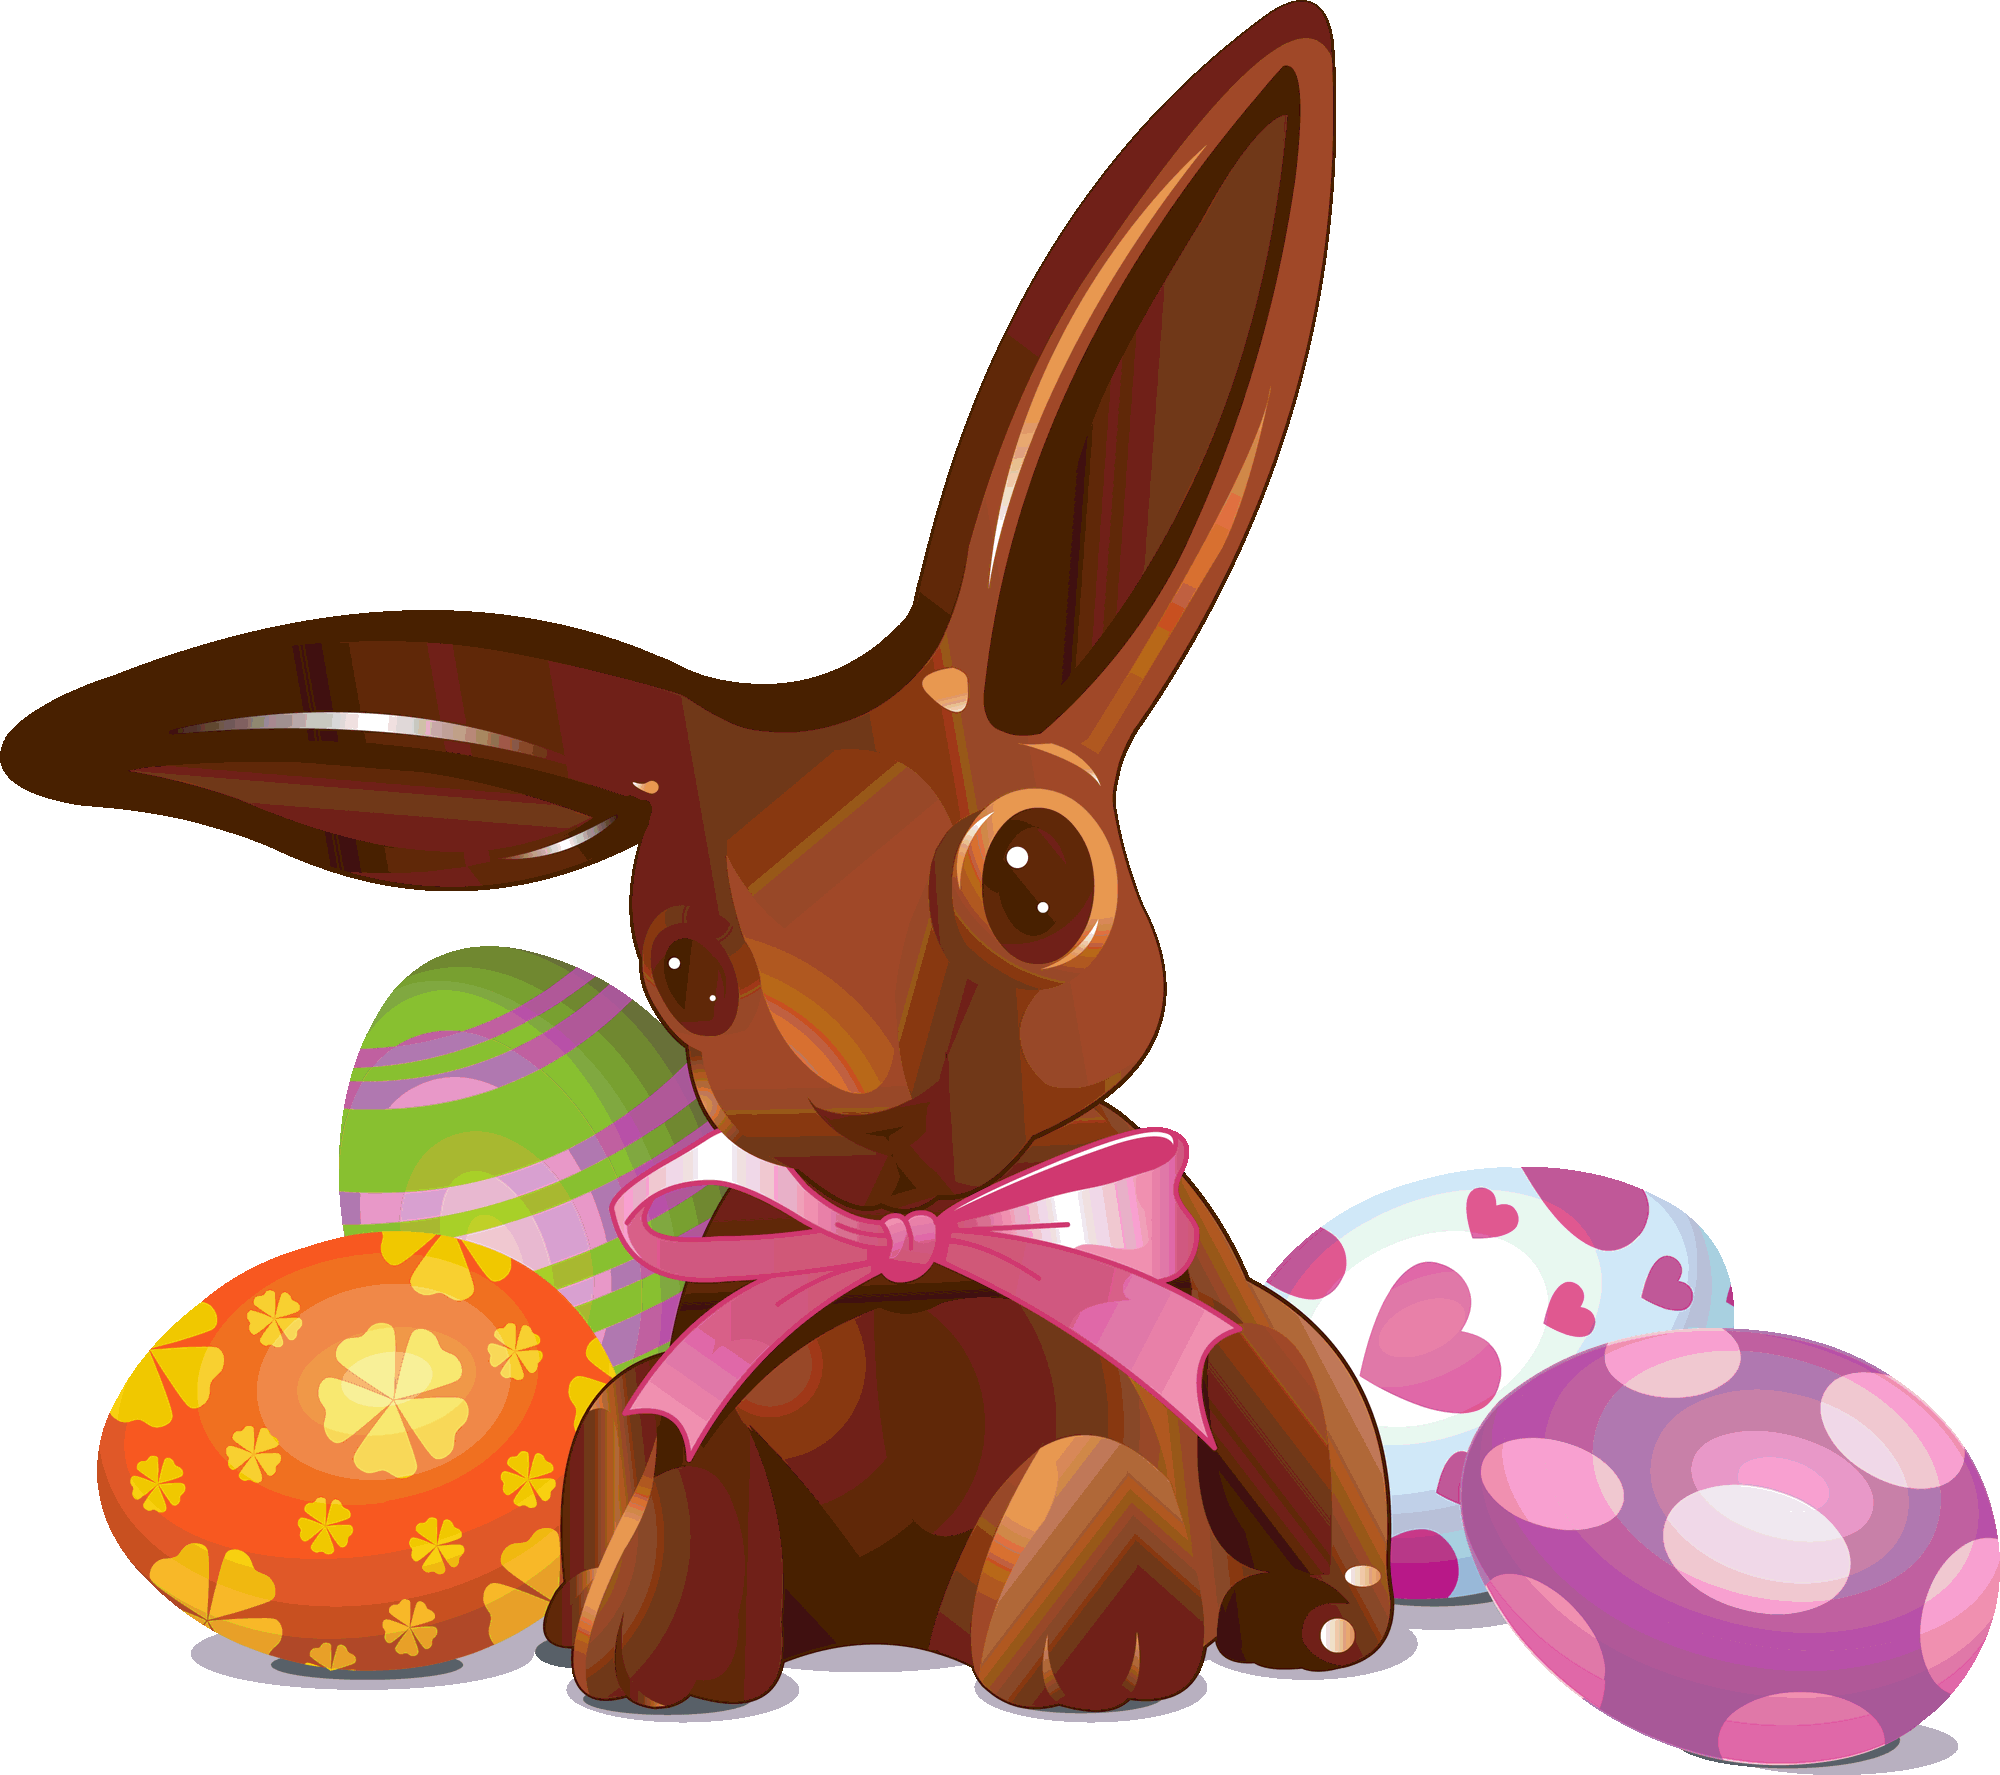 Easter Chocolate Bunny Clipart.